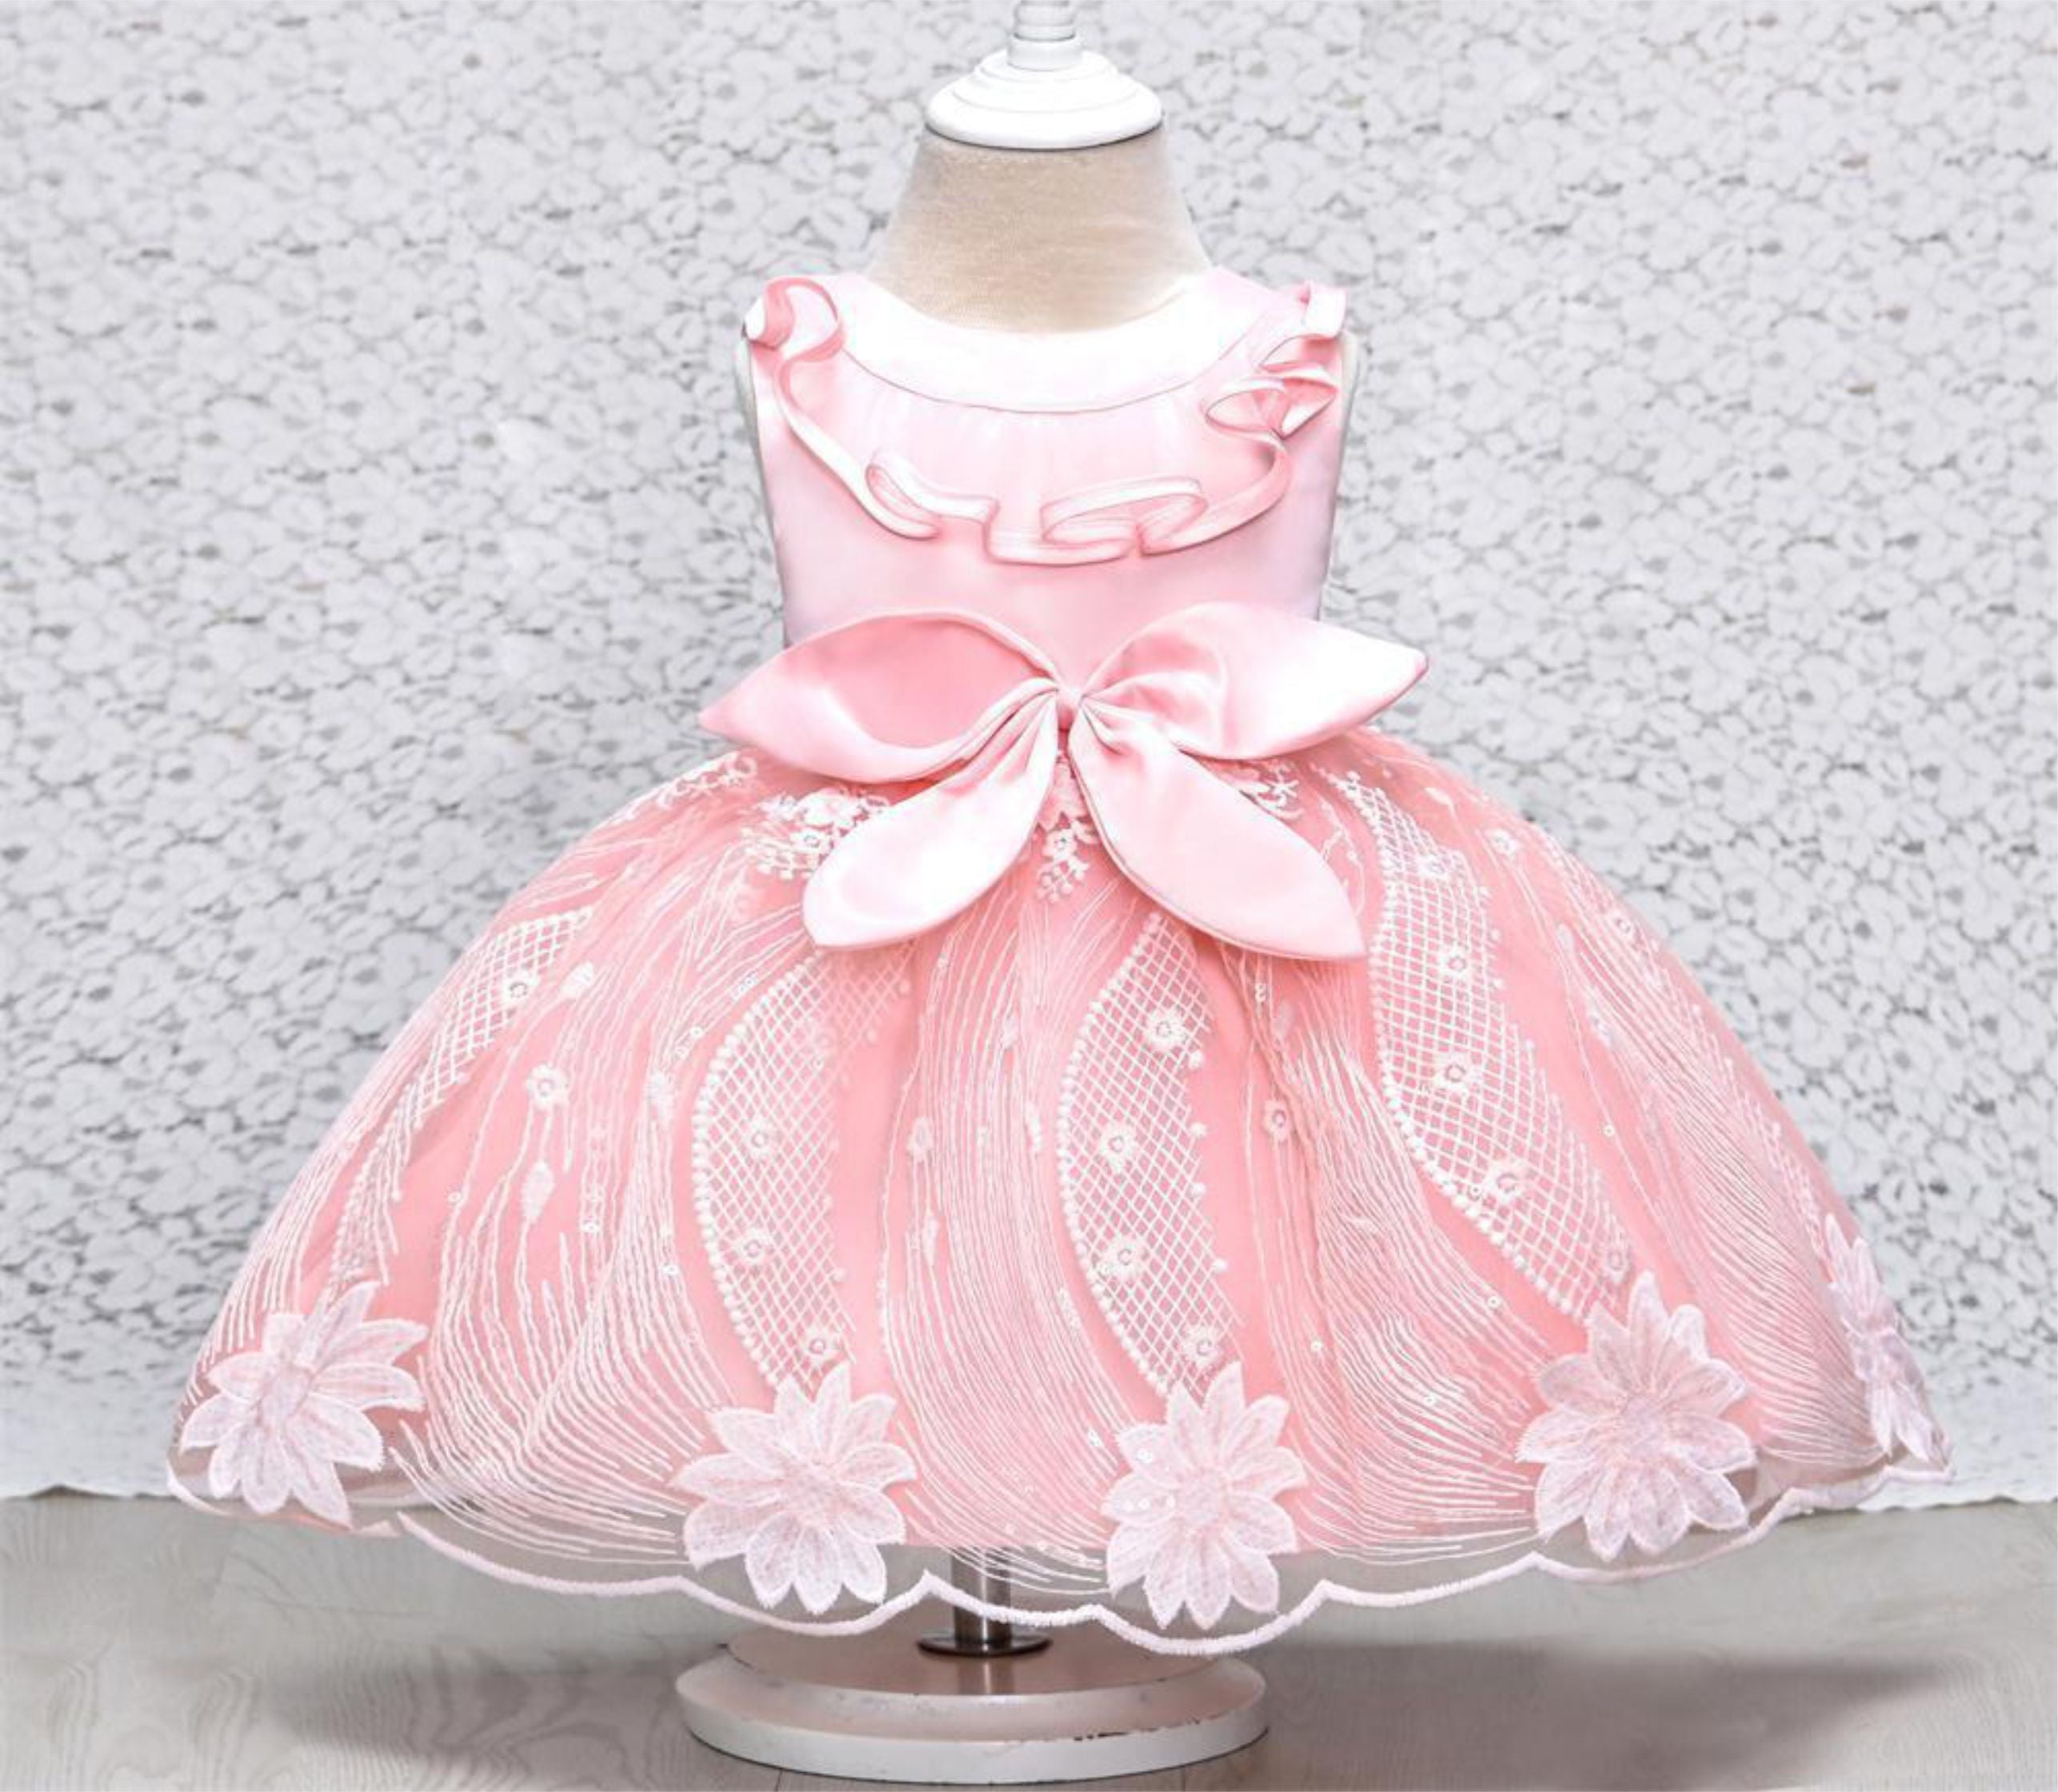 Birthday Baby Girl Dress With Flowers, Maxi Flower Girl Dress, Maxi Girl  Dress, First Birthday Dress, Wedding Baby Dress, Princess Dress - Etsy |  First birthday dresses, Pink flower girl dresses, Flower